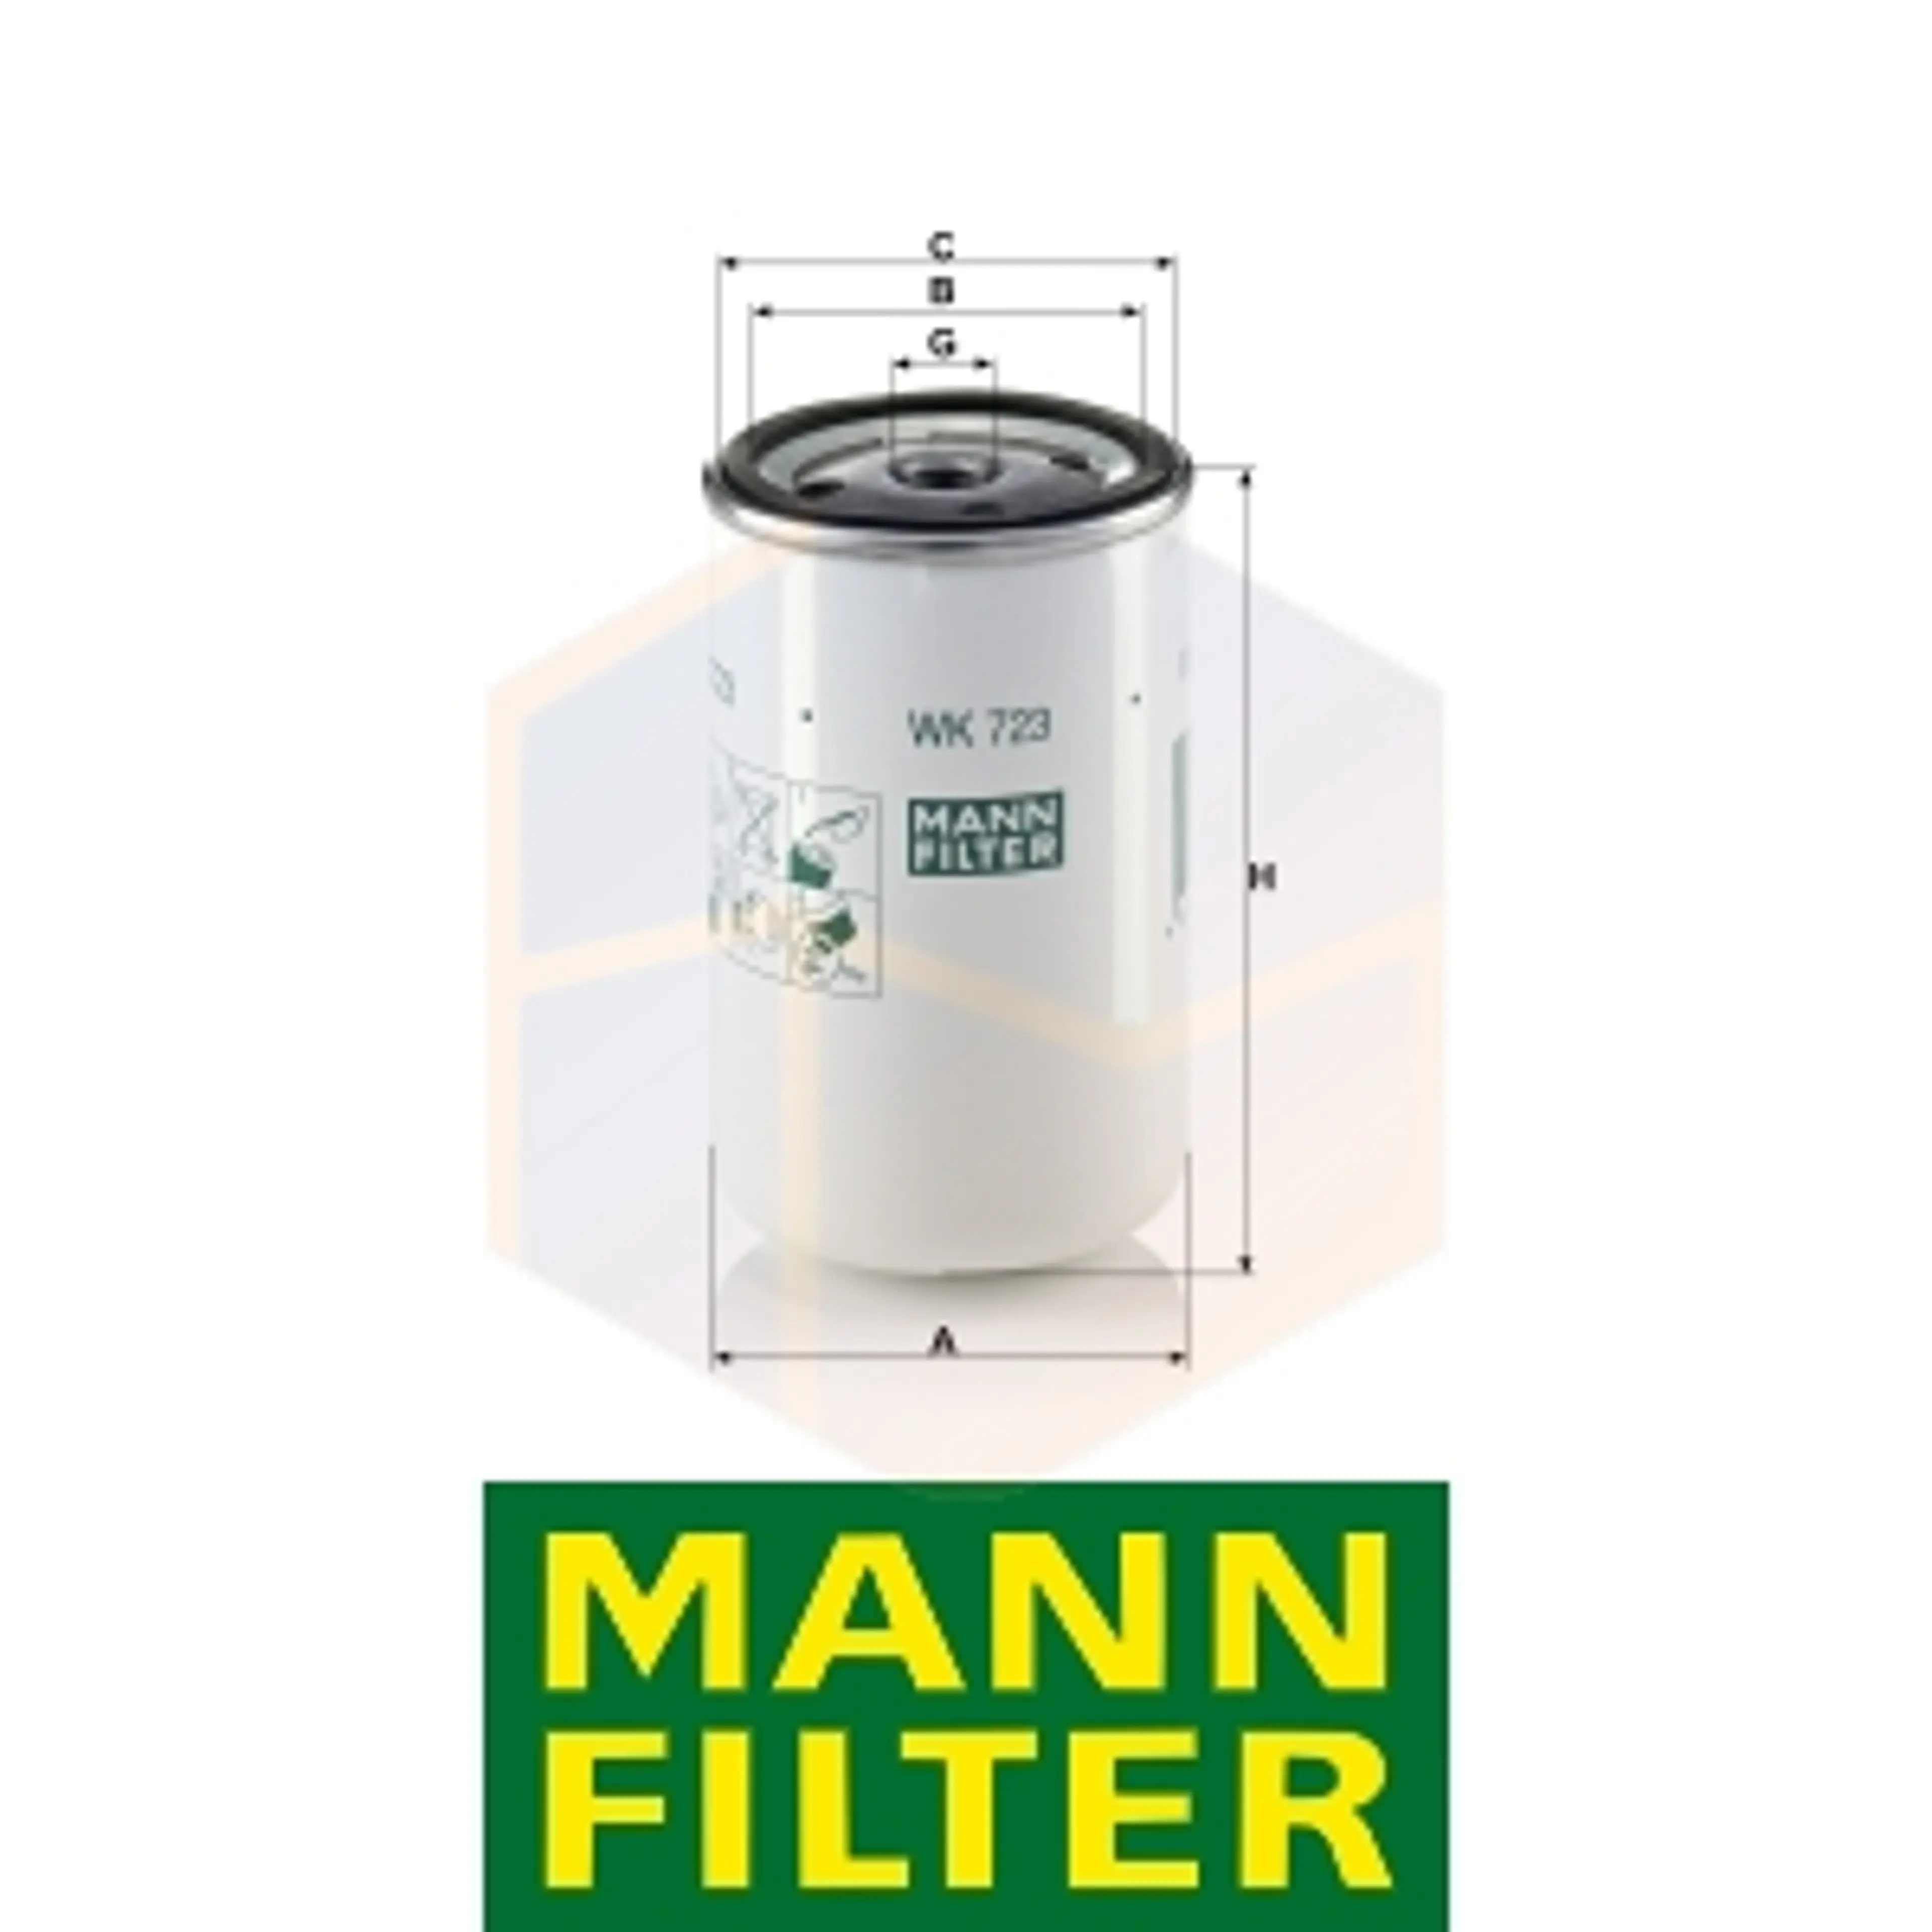 FILTRO COMBUSTIBLE WK 723 MANN